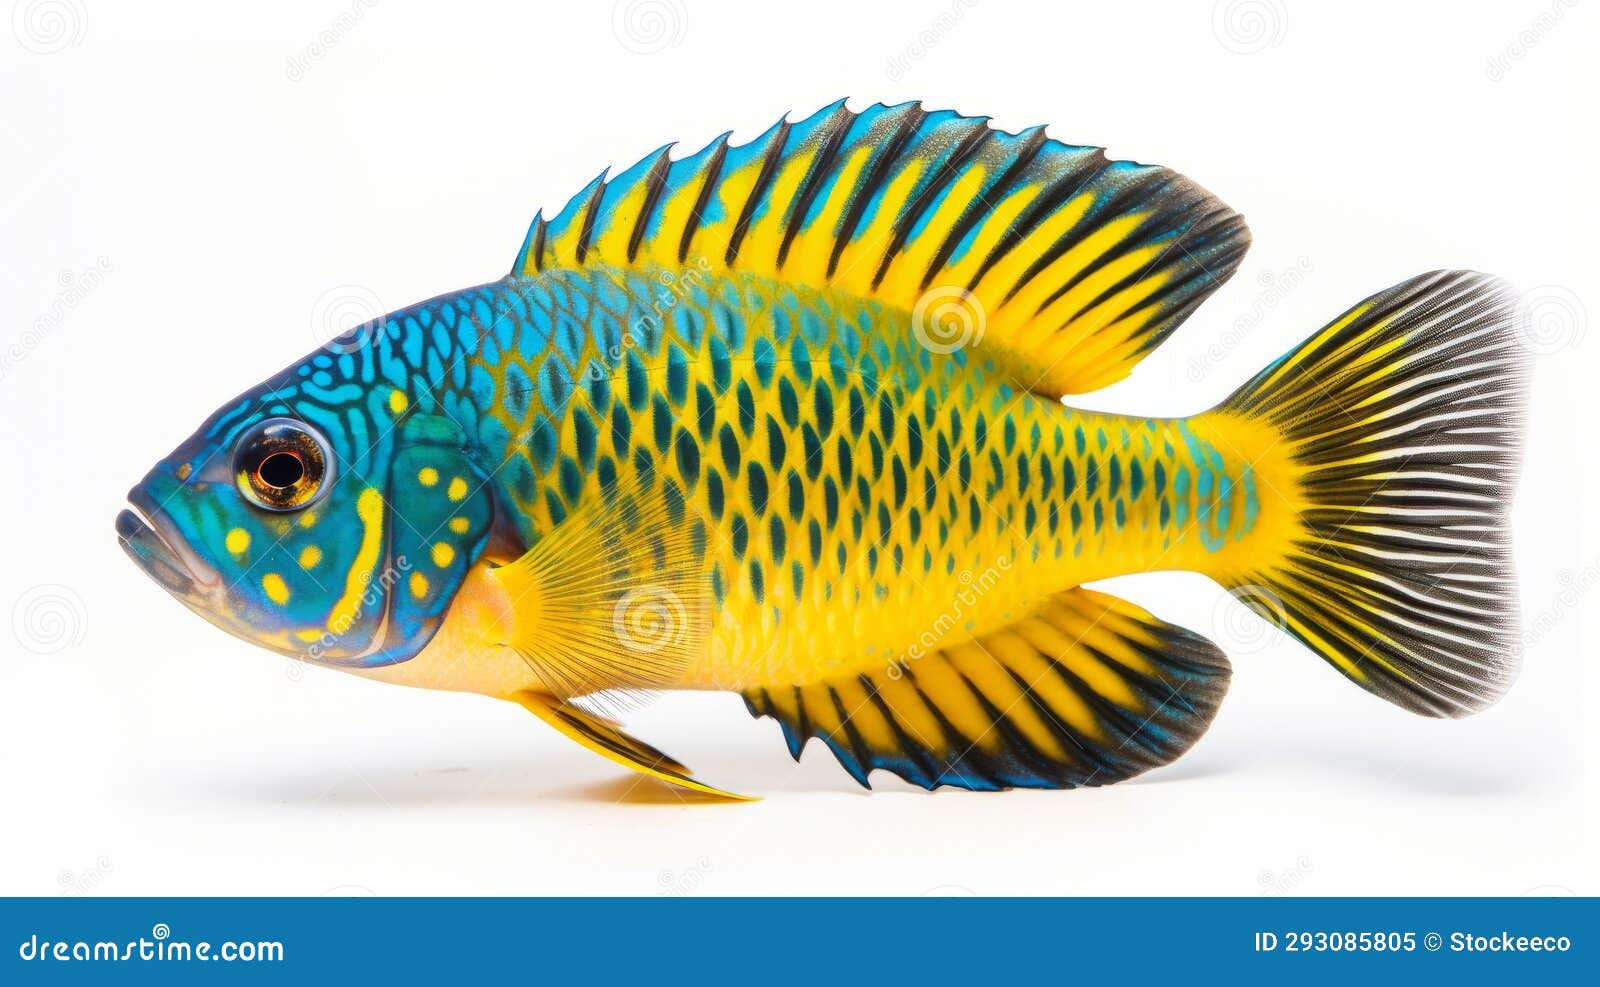 Vibrant Peacock Cichlid: Afro-caribbean Inspired Fish on White